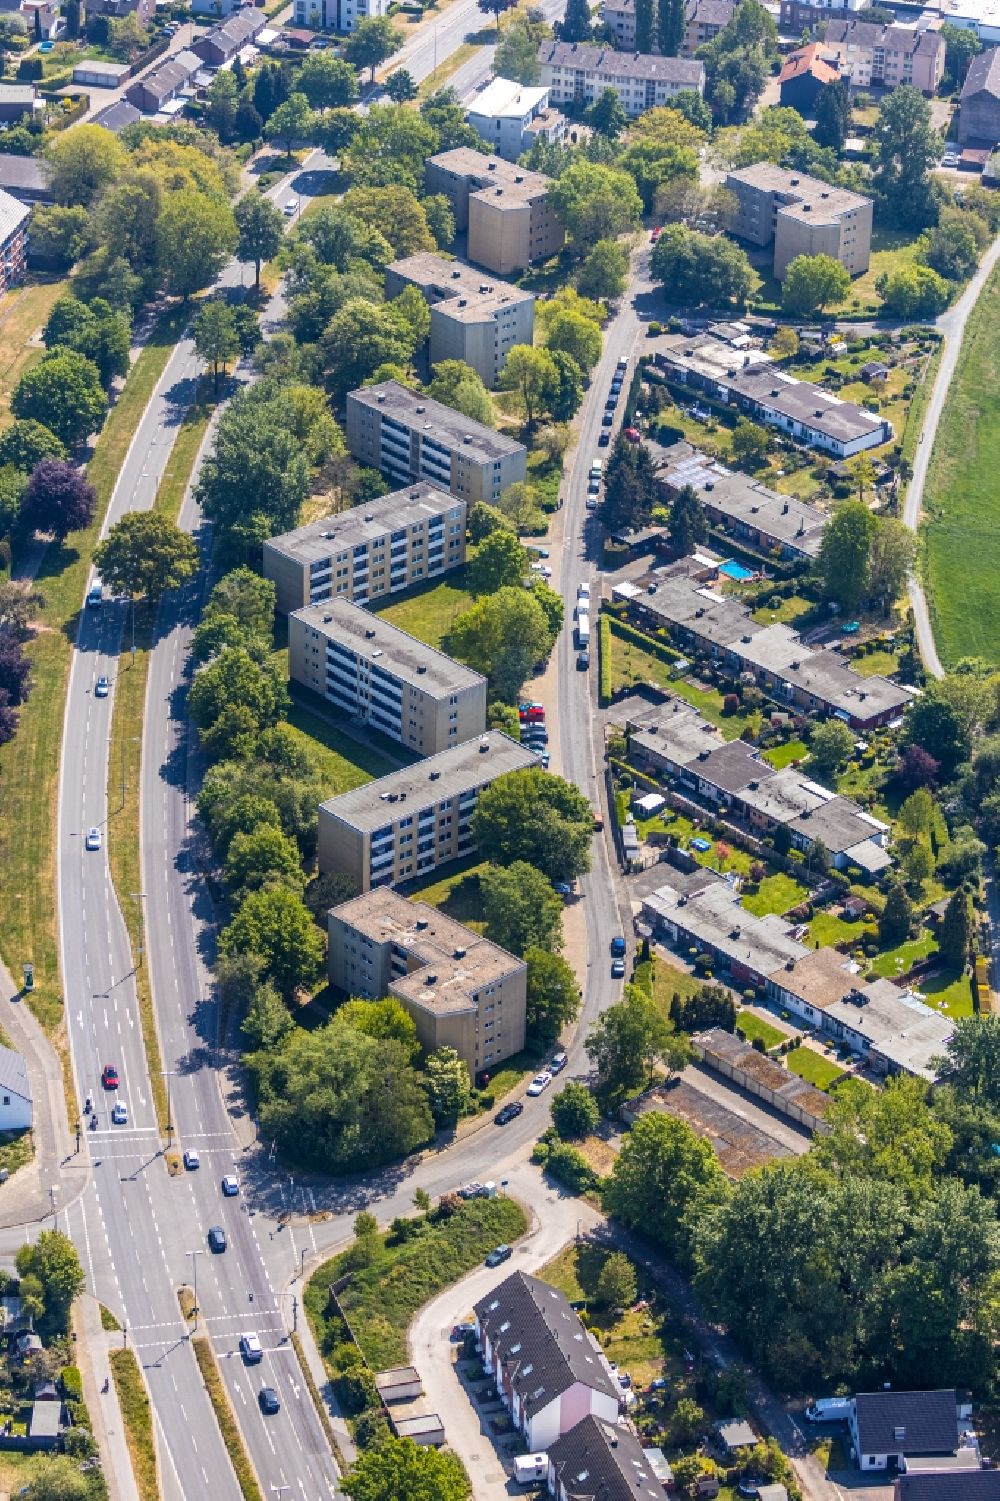 Aerial image Wesel - Residential area - Mixed development of a multi-family and single-family housing estate on Hans-Boeckler-Strasse in the Feldmark district in Wesel in the state of North Rhine-Westphalia, Germany